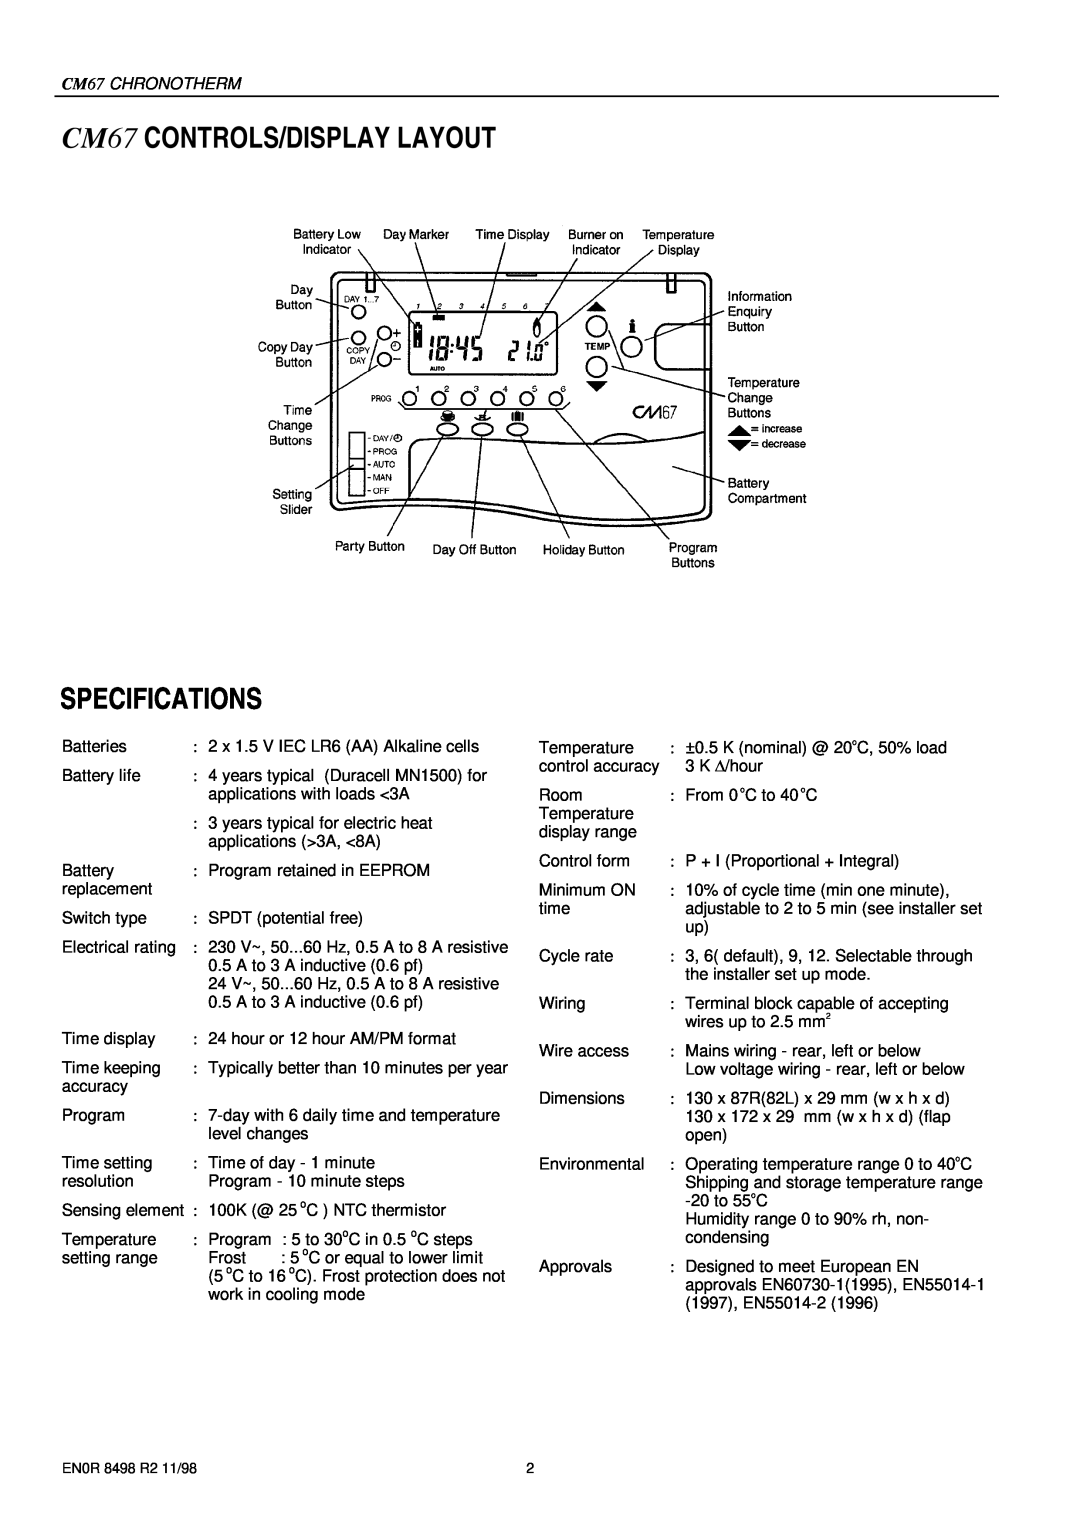 Honeywell specifications Specifications, CM67 CONTROLS/DISPLAY LAYOUT 